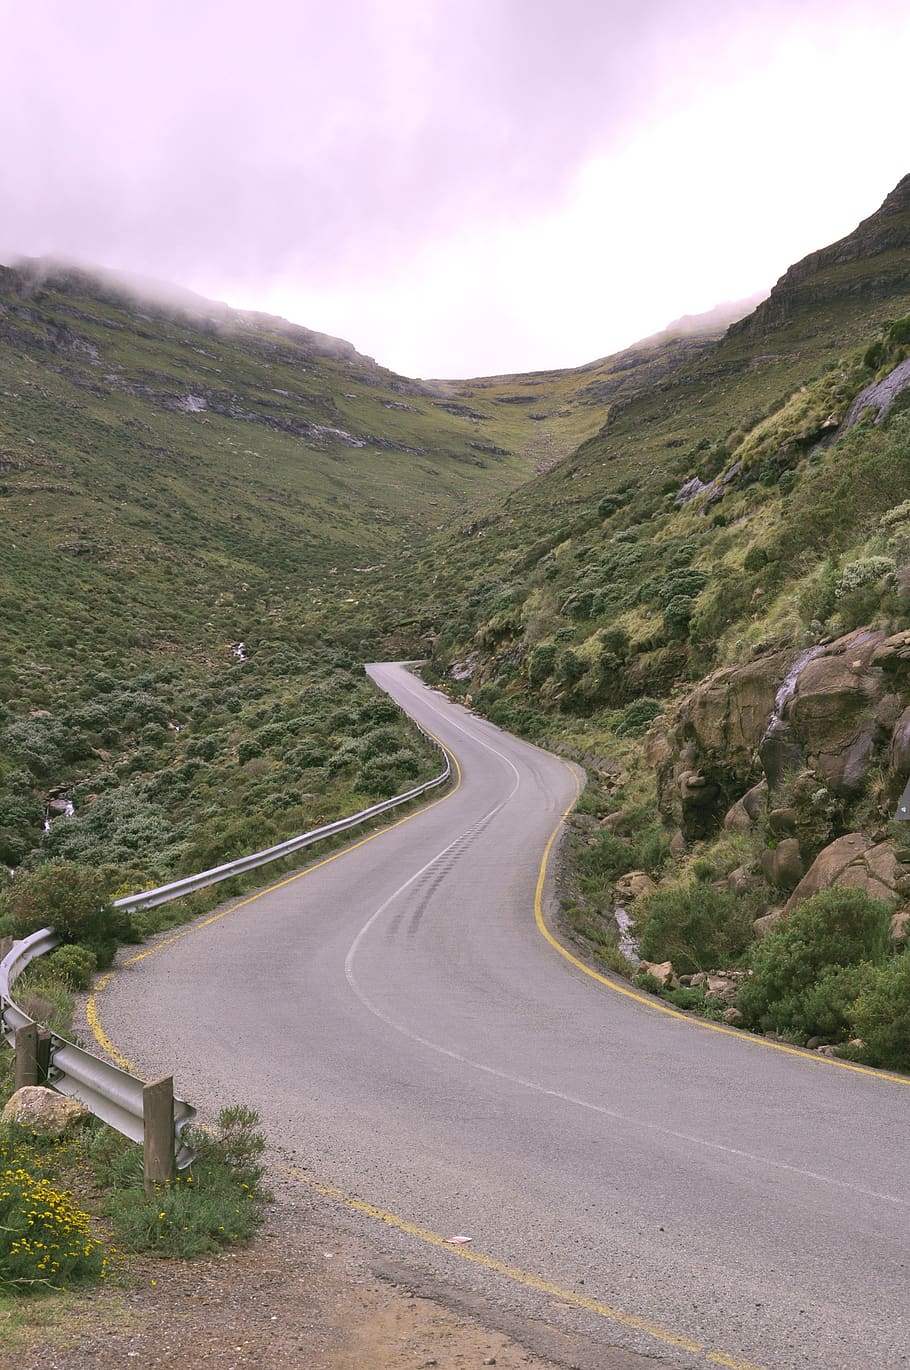 lesotho, africa, road, nature, travel, mountain, highway, landscape, trip, route